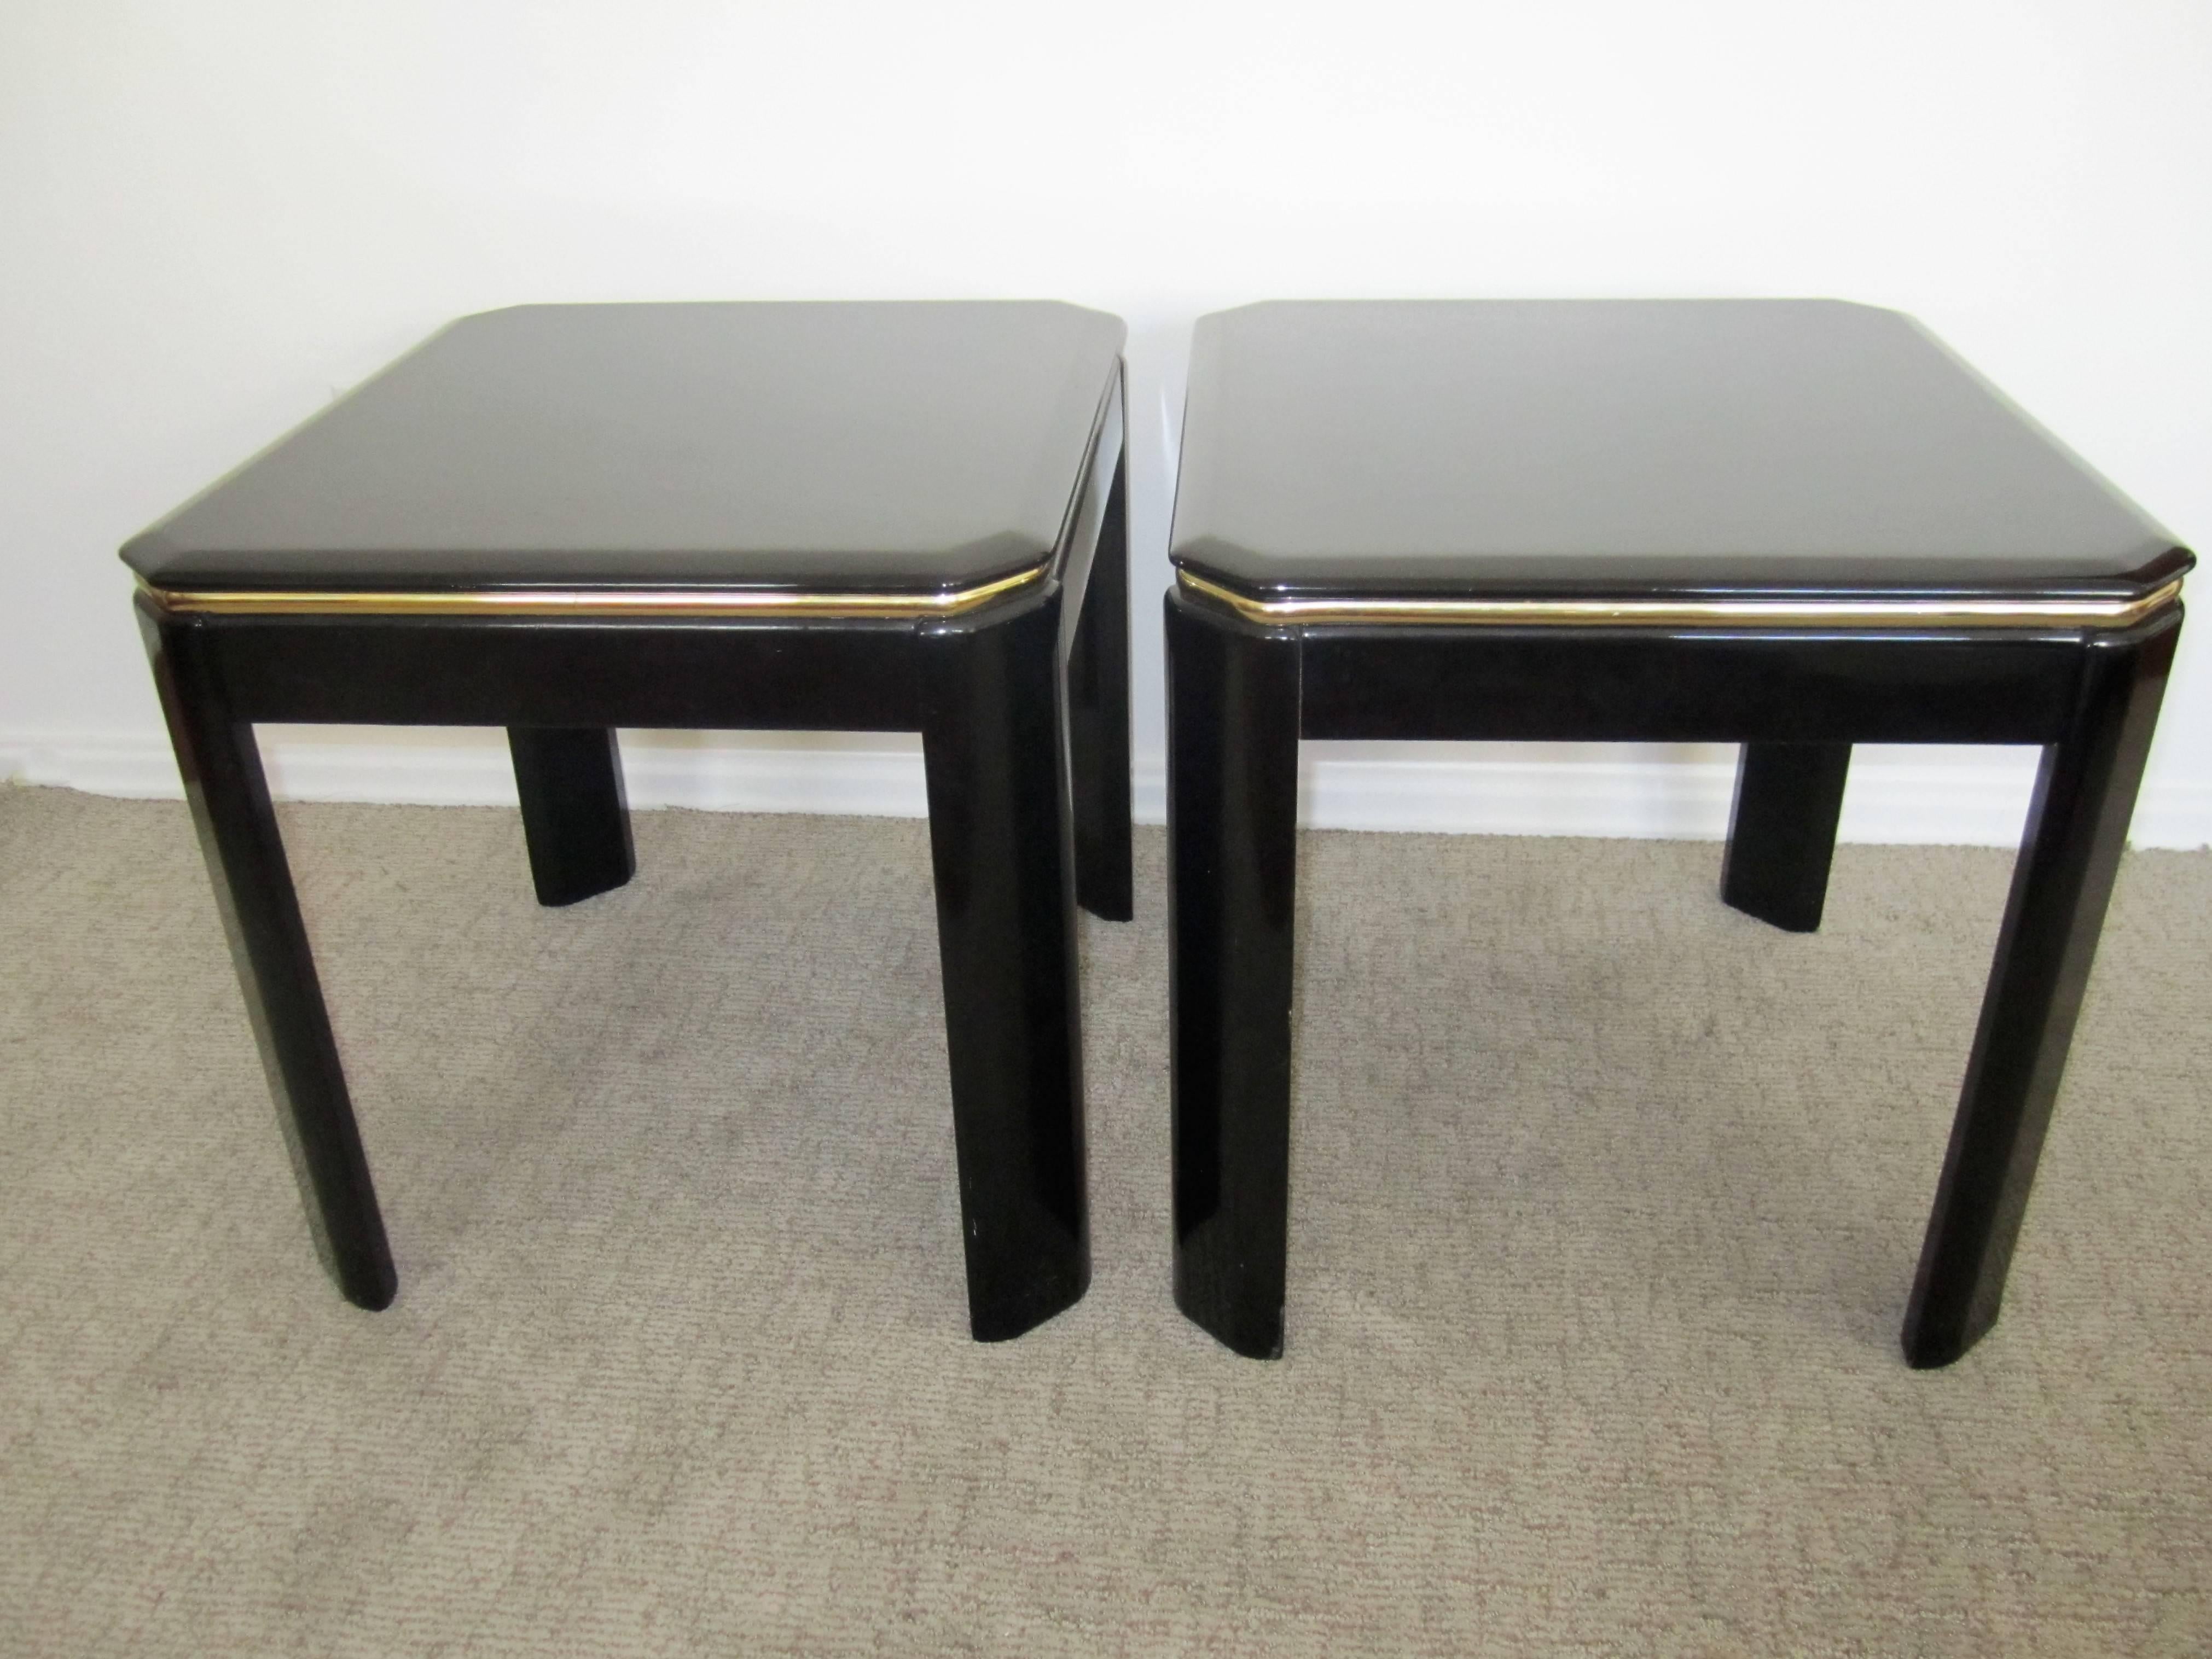 A pair of vintage post-modern square black lacquer and brass end tables or nightstand tables with tapered corners. Pair available here online. By request, pair can be made available by appointment to the Trade (in New York.) 